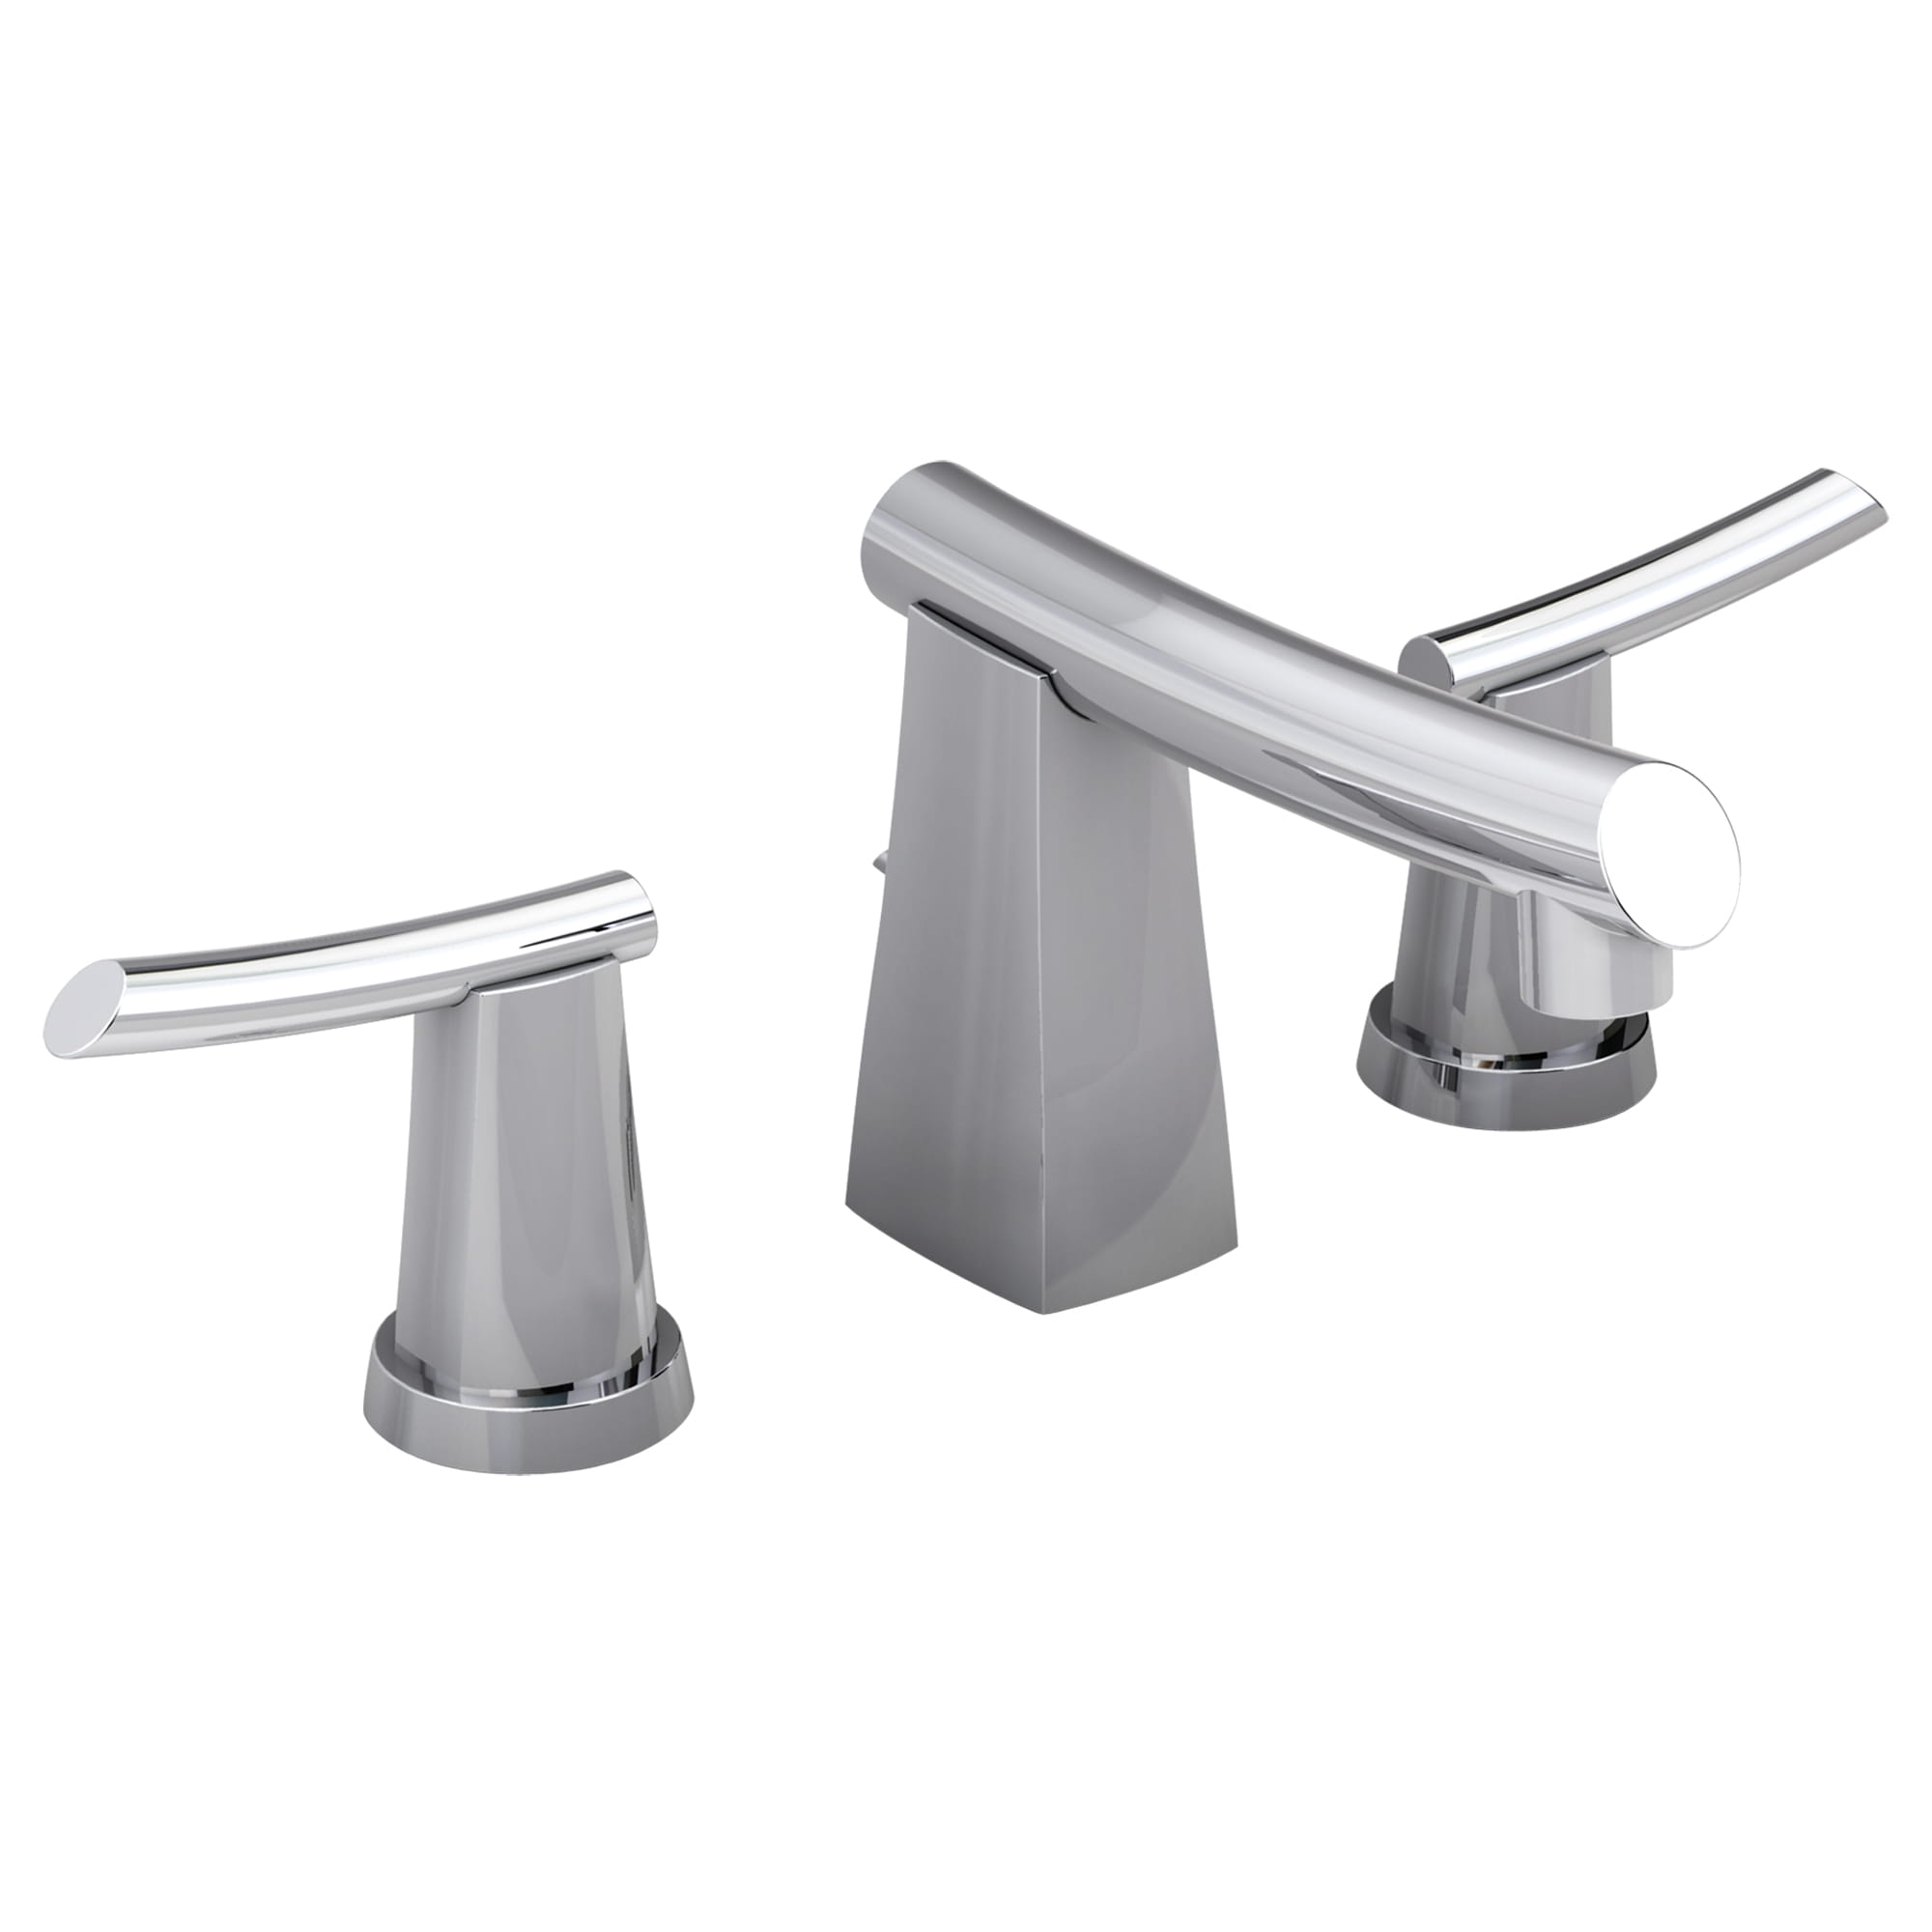 Green Tea 8 Inch Widespread Pull-Out Bathroom Faucet